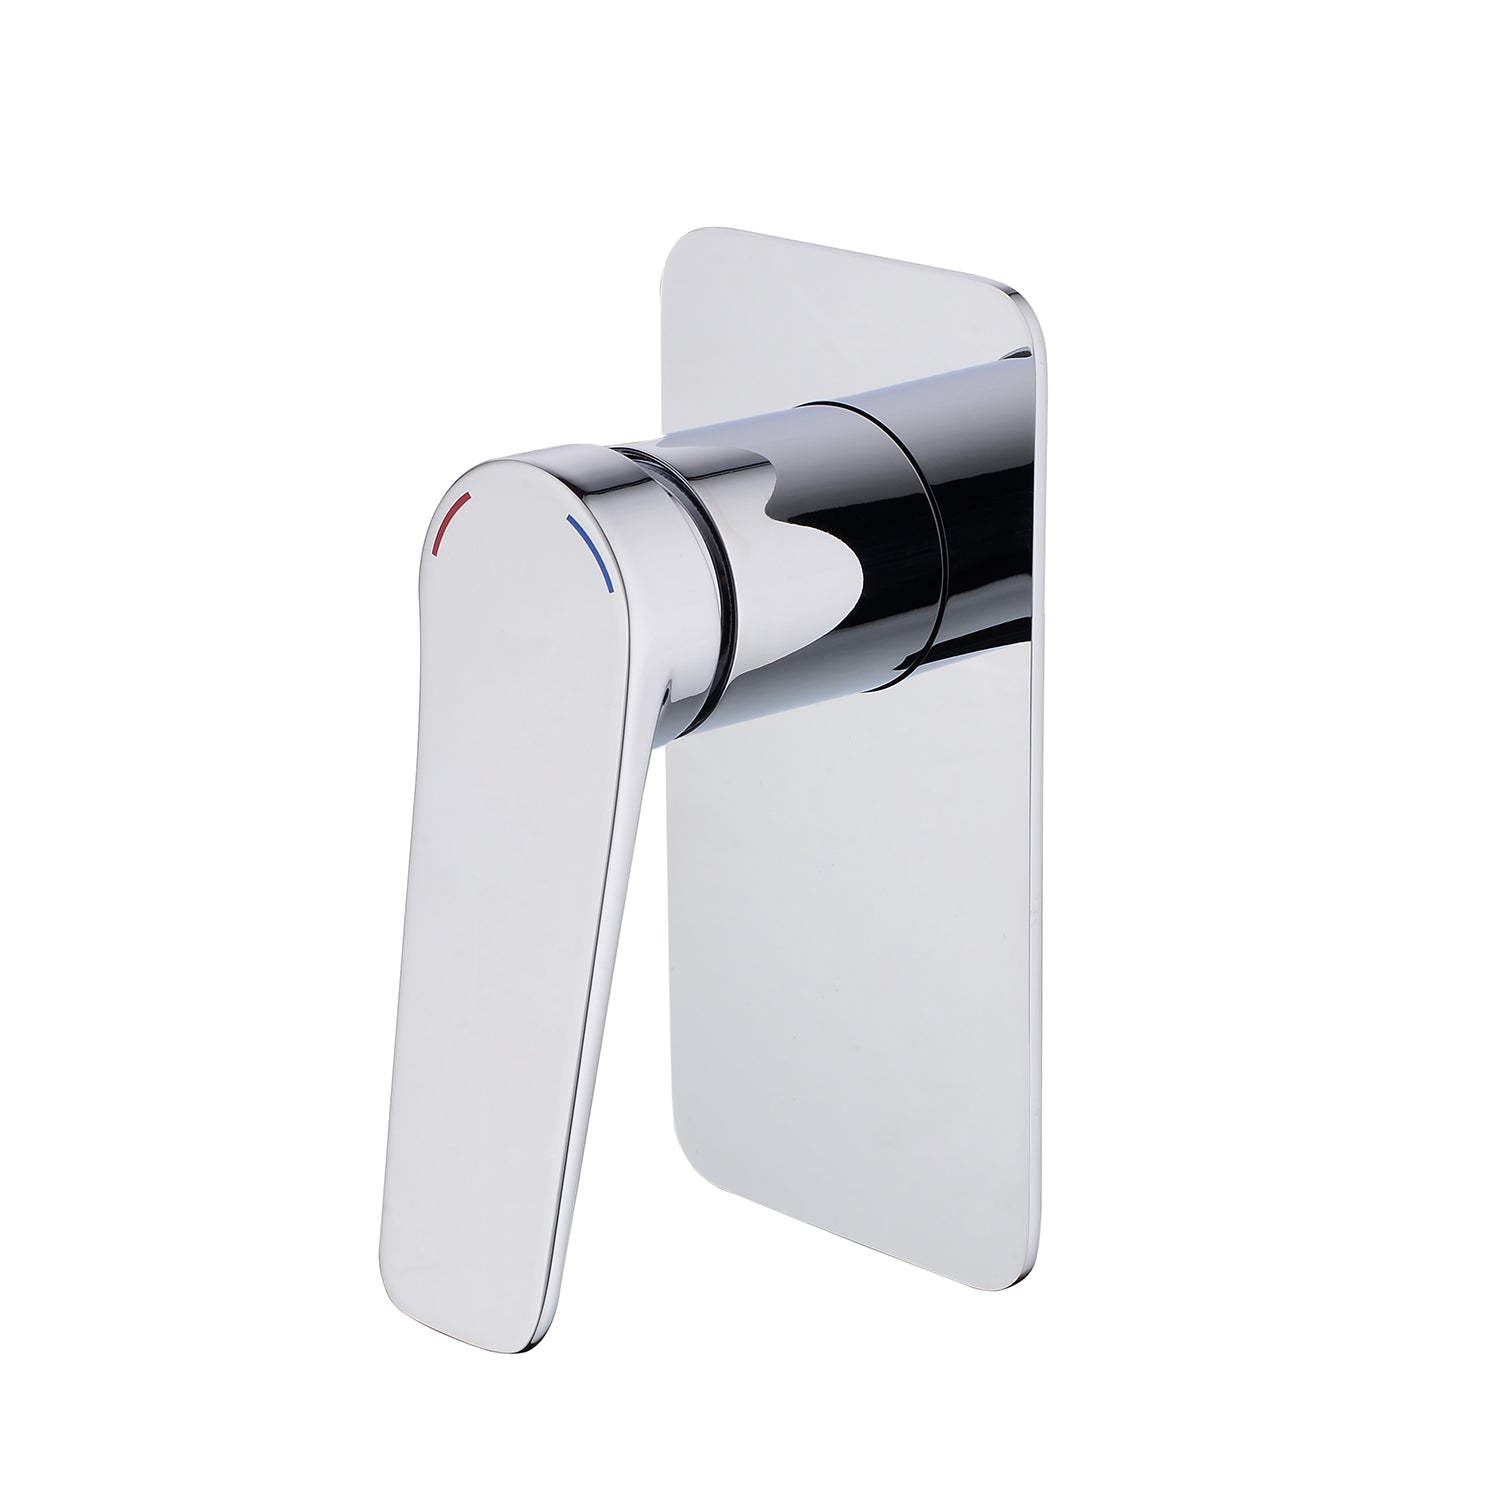 DAX Square Shower Valve with 1 Functions Chrome Finish (DAX-13555-CR)